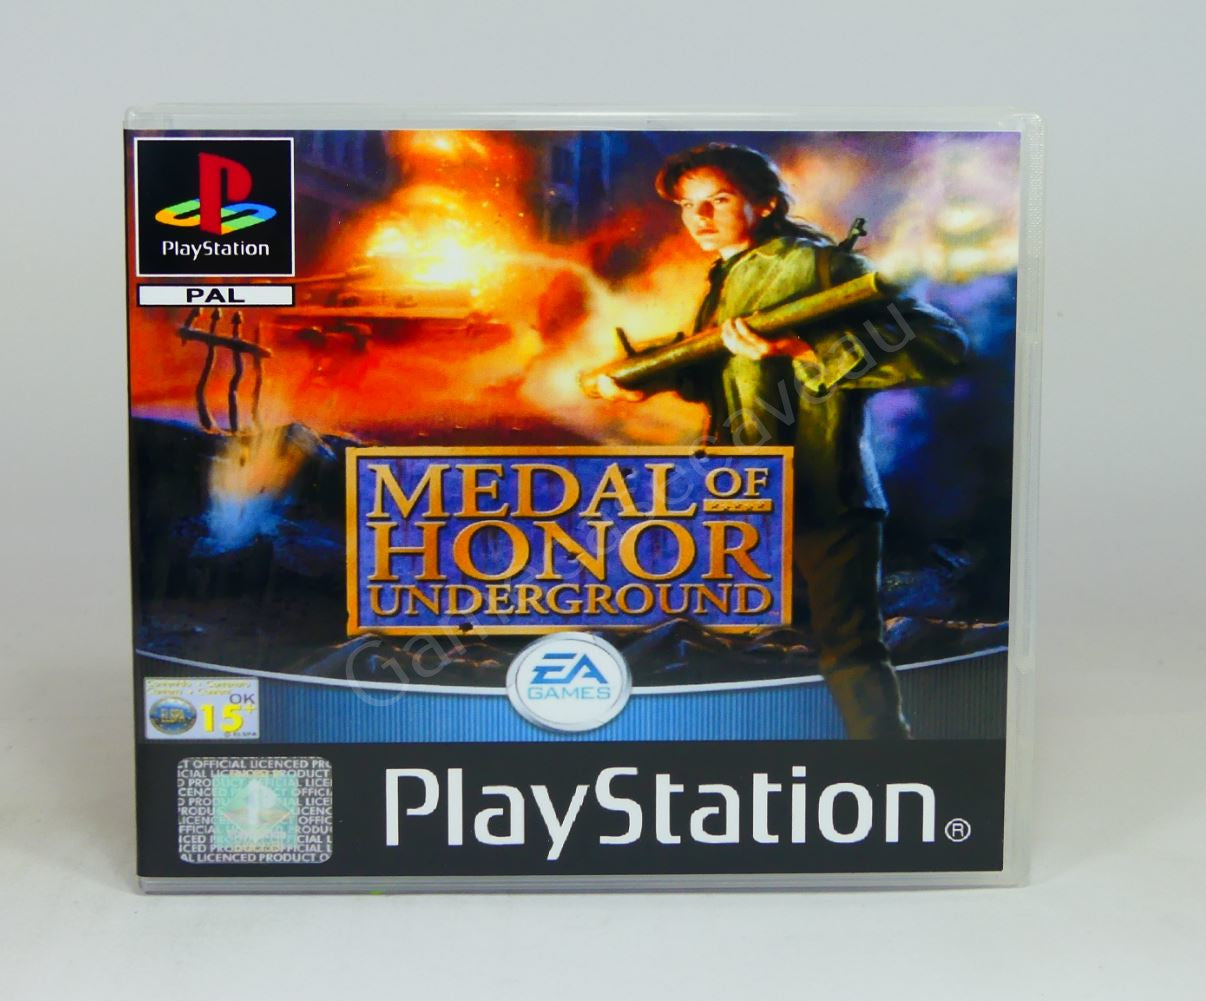 Medal of Honor Underground - PS1 Replacement Case